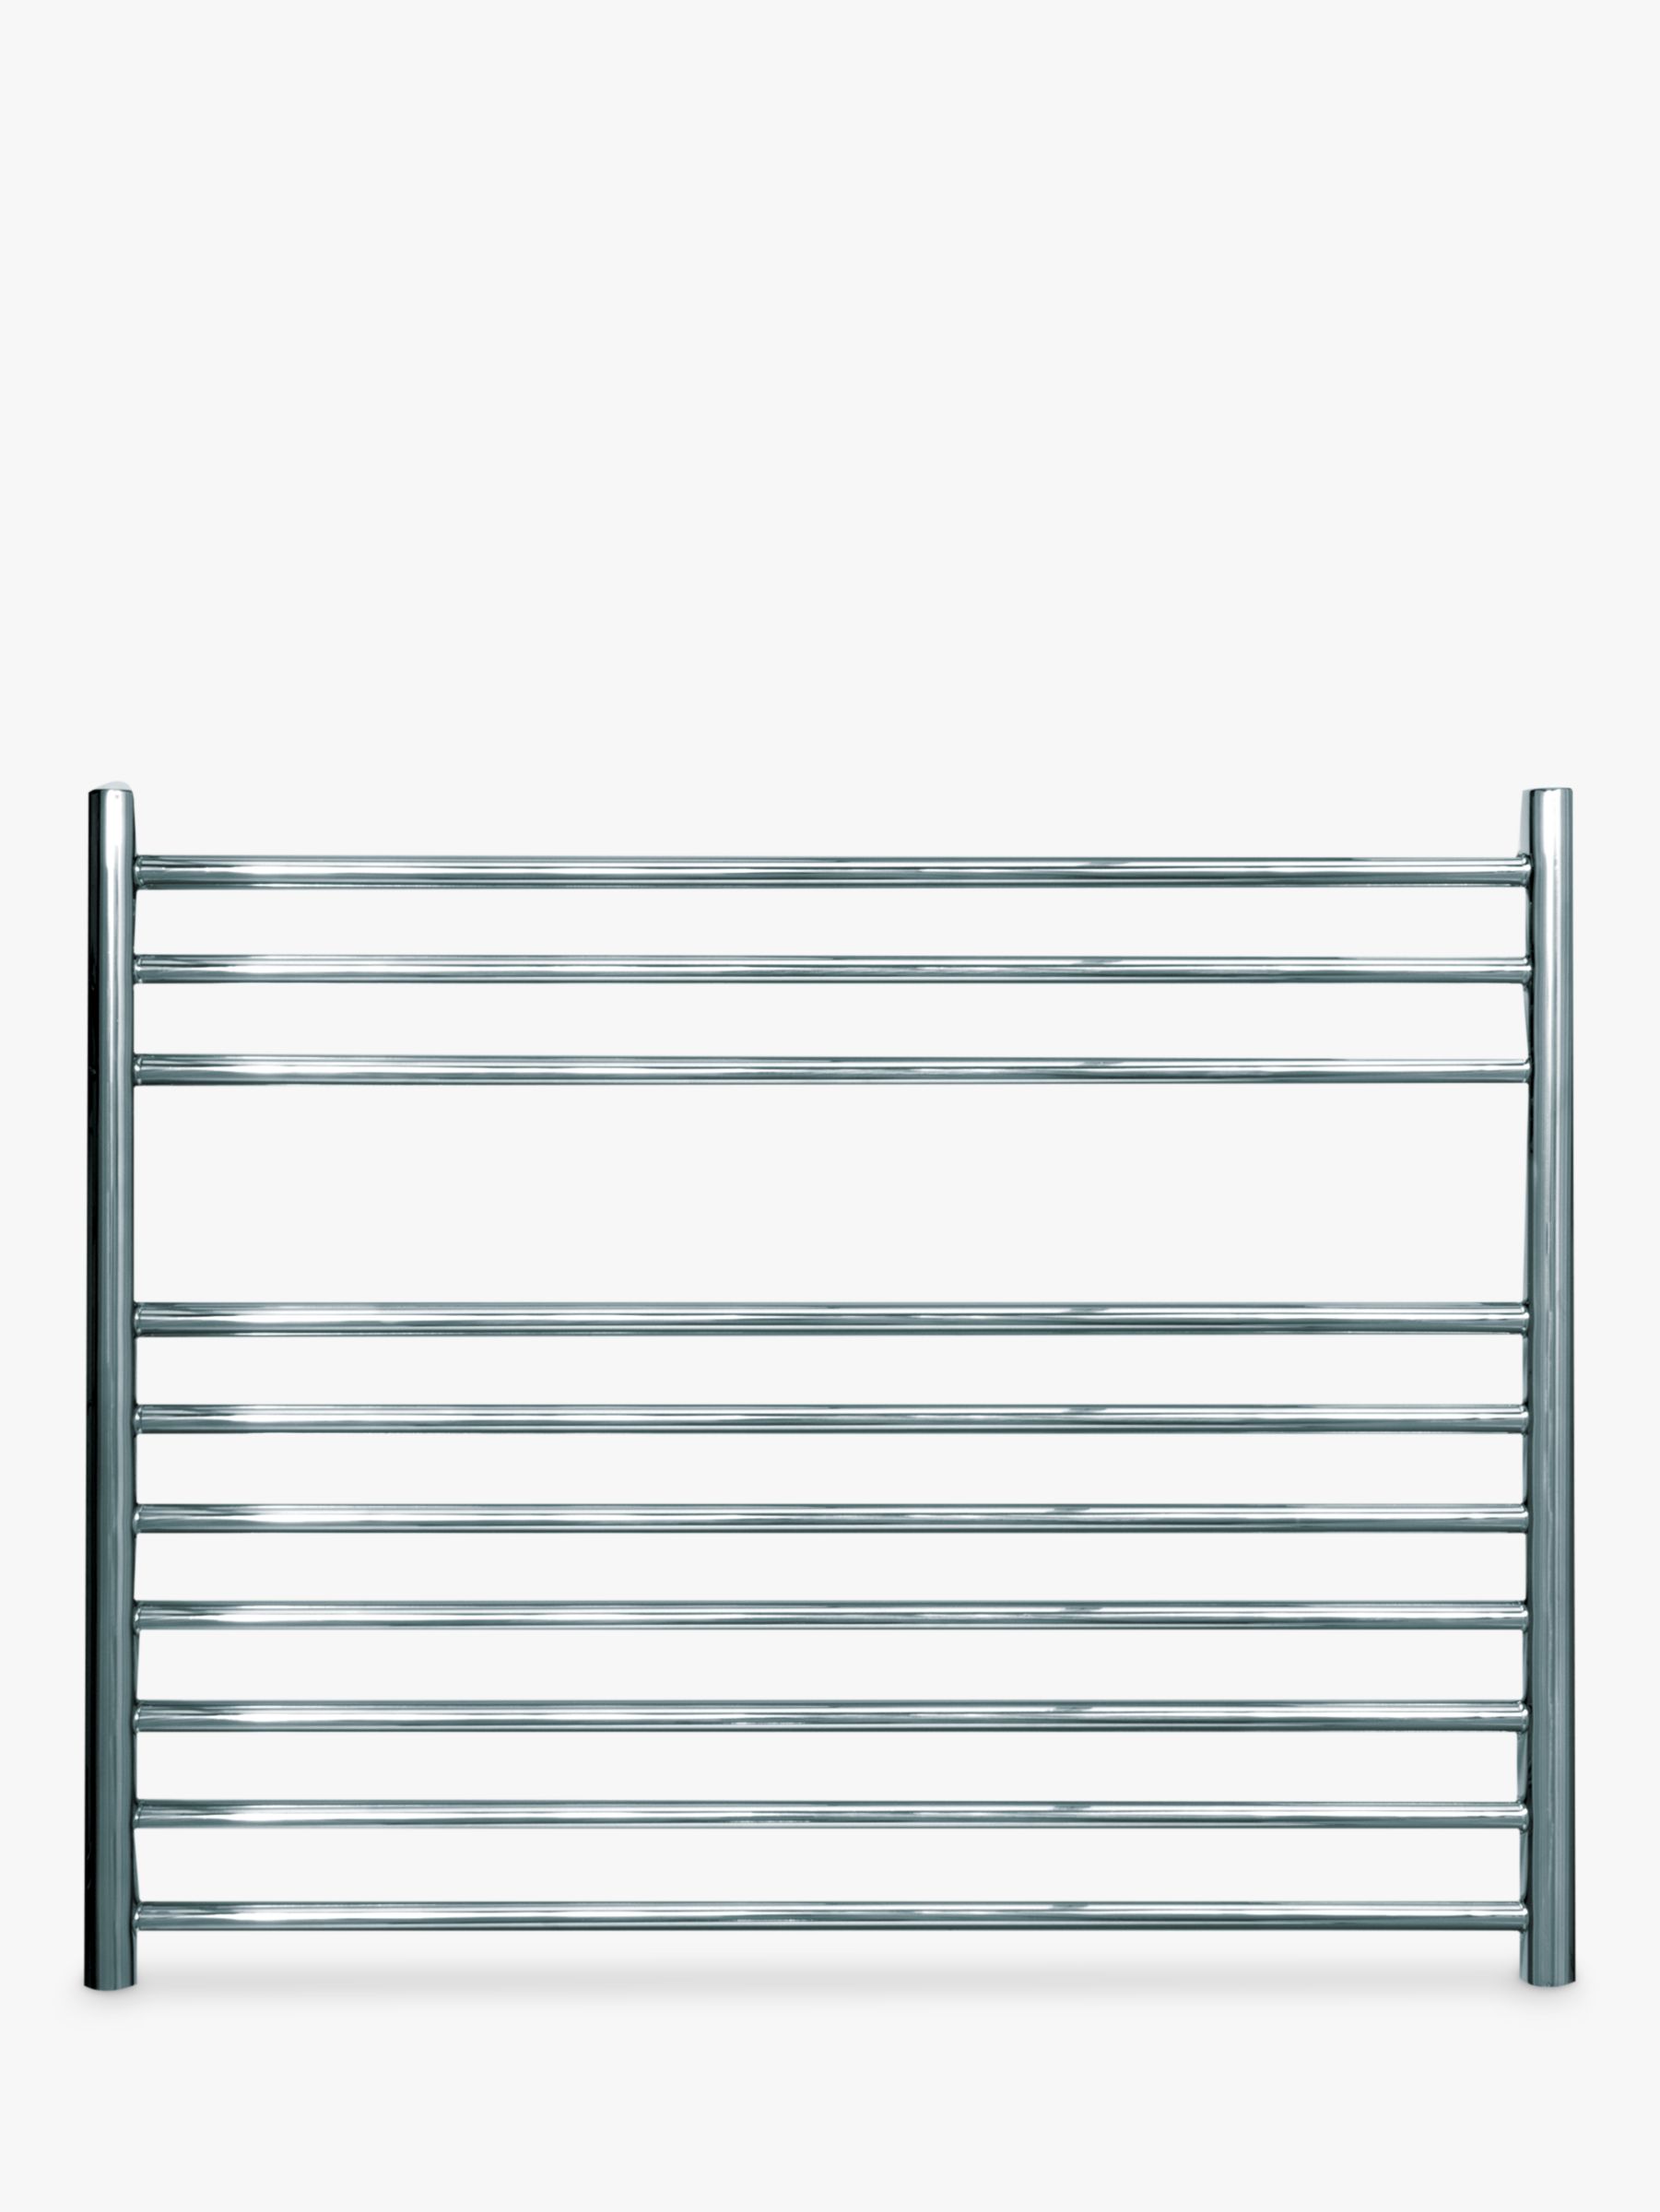 John Lewis & Partners Priory Dual Fuel Heated Towel Rail and Valves, from the Wall